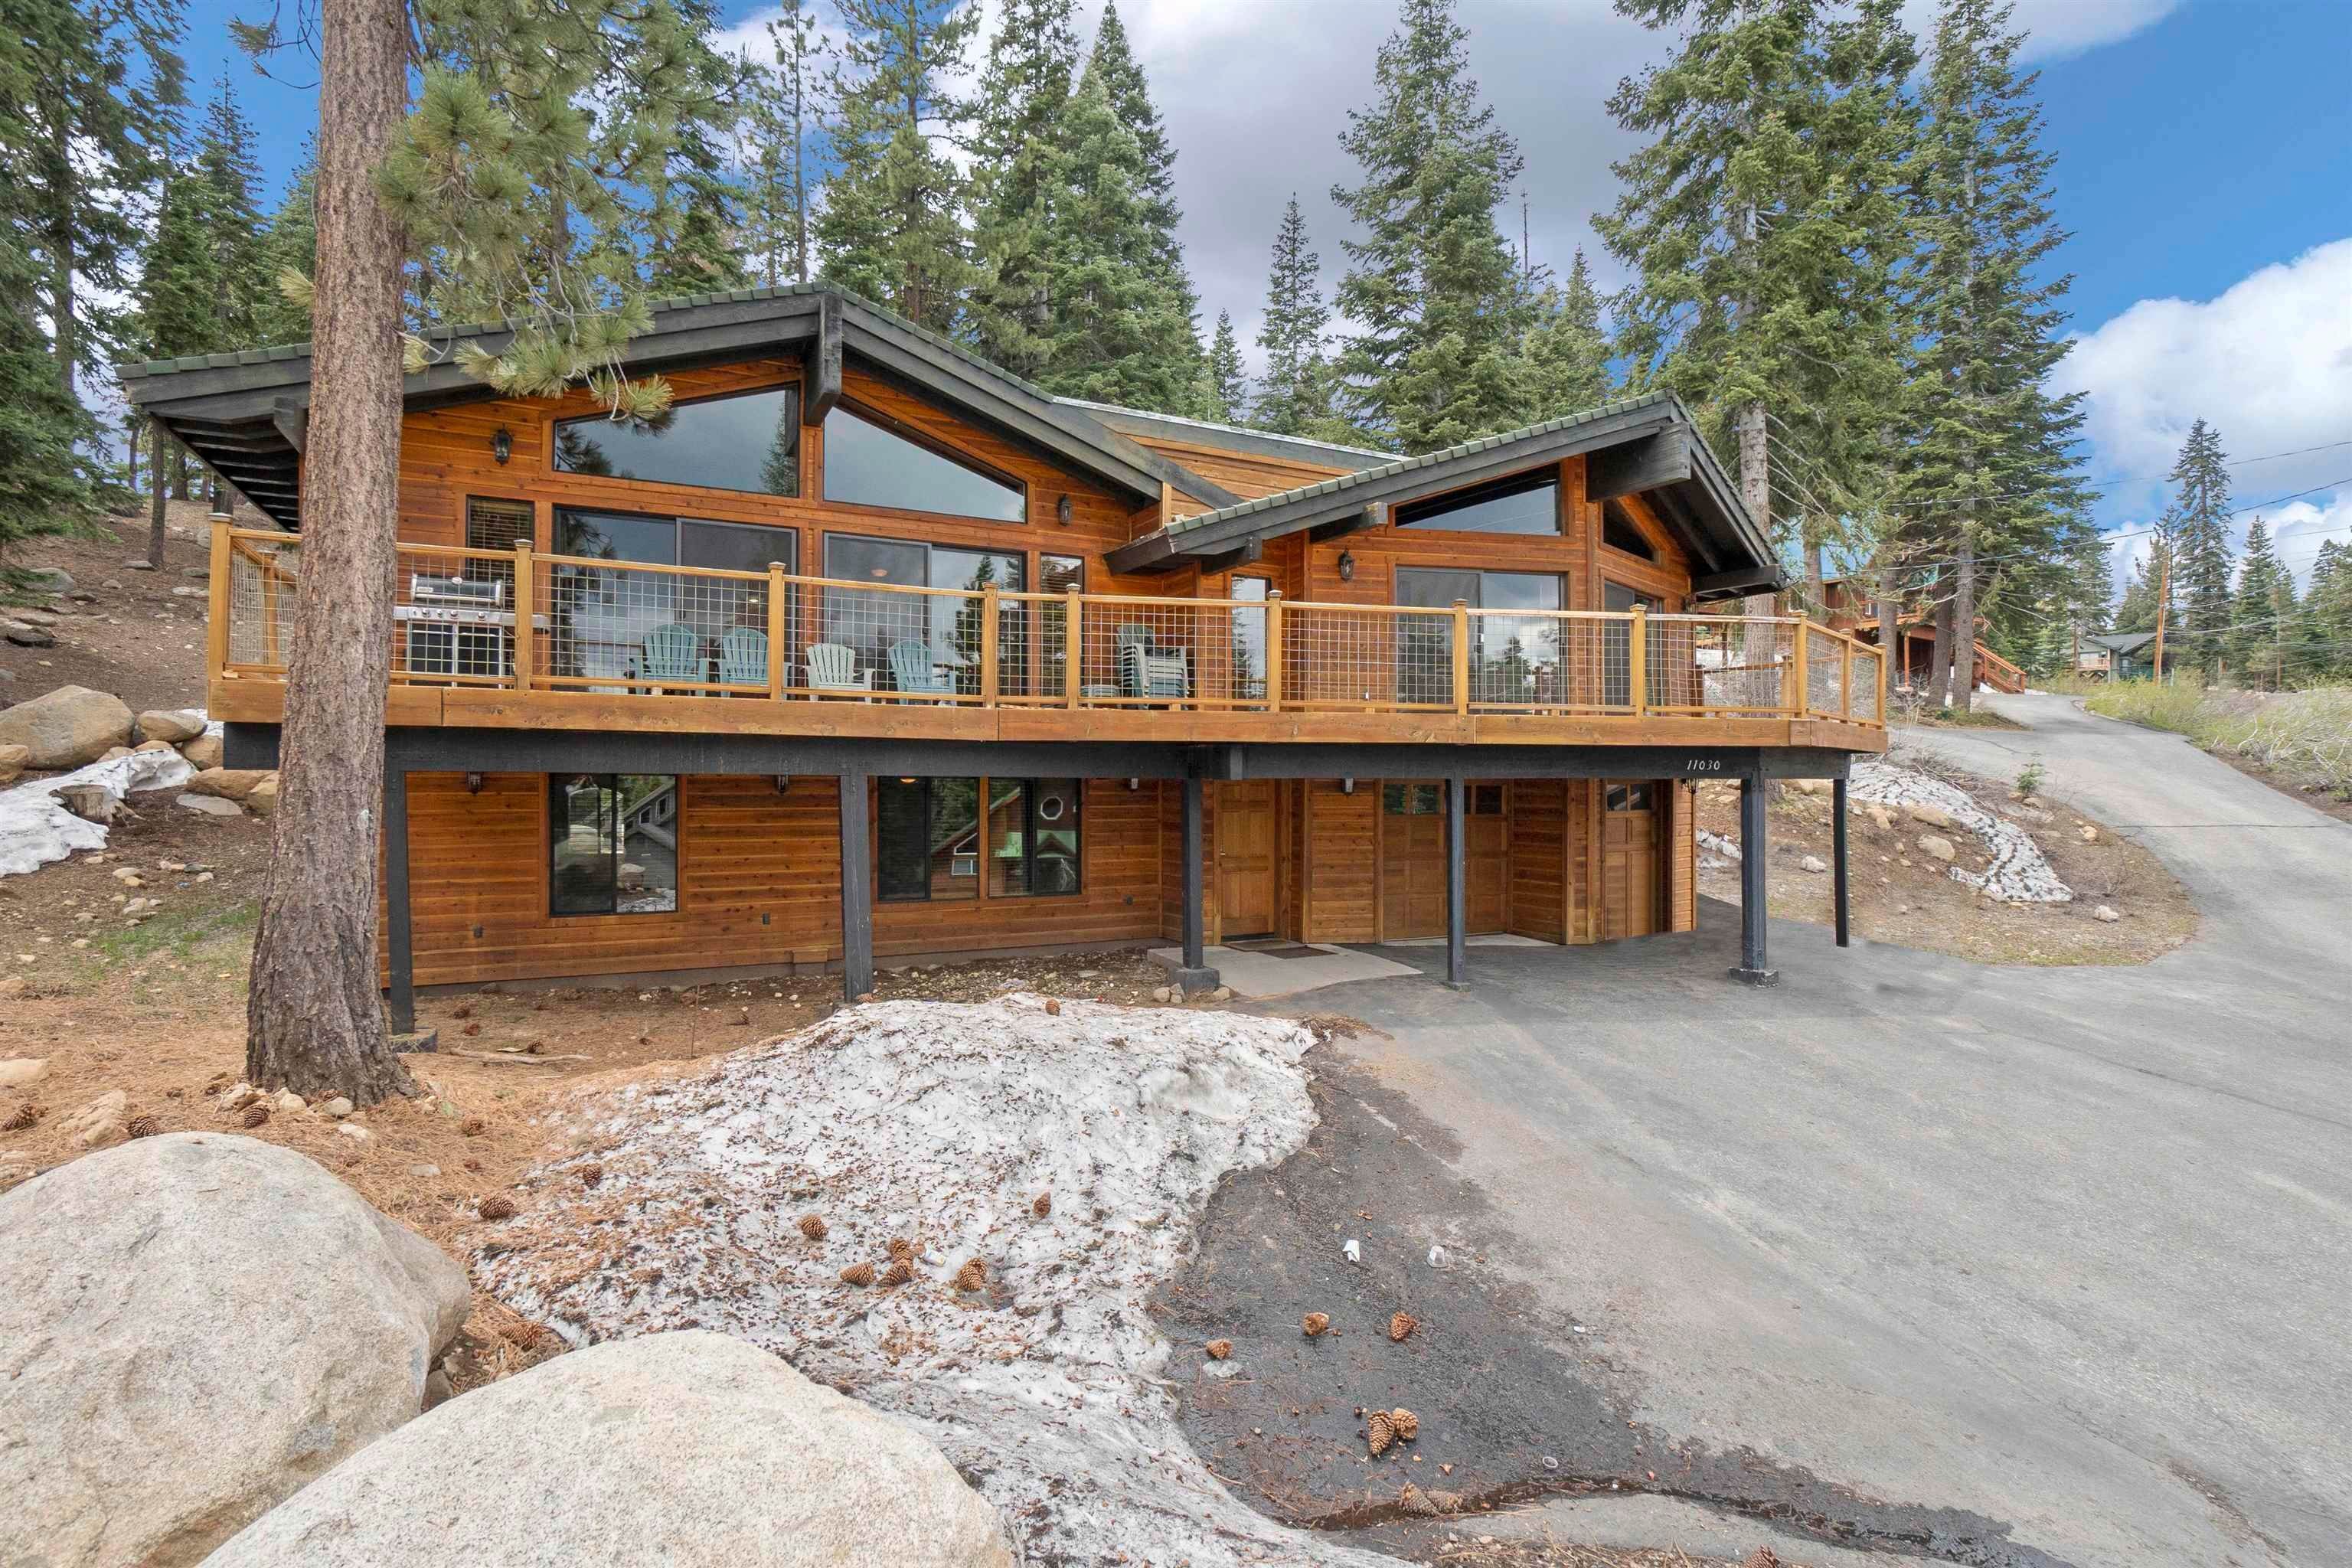 Single Family Homes for Active at 11030 Skislope Way Truckee, California 96161 United States